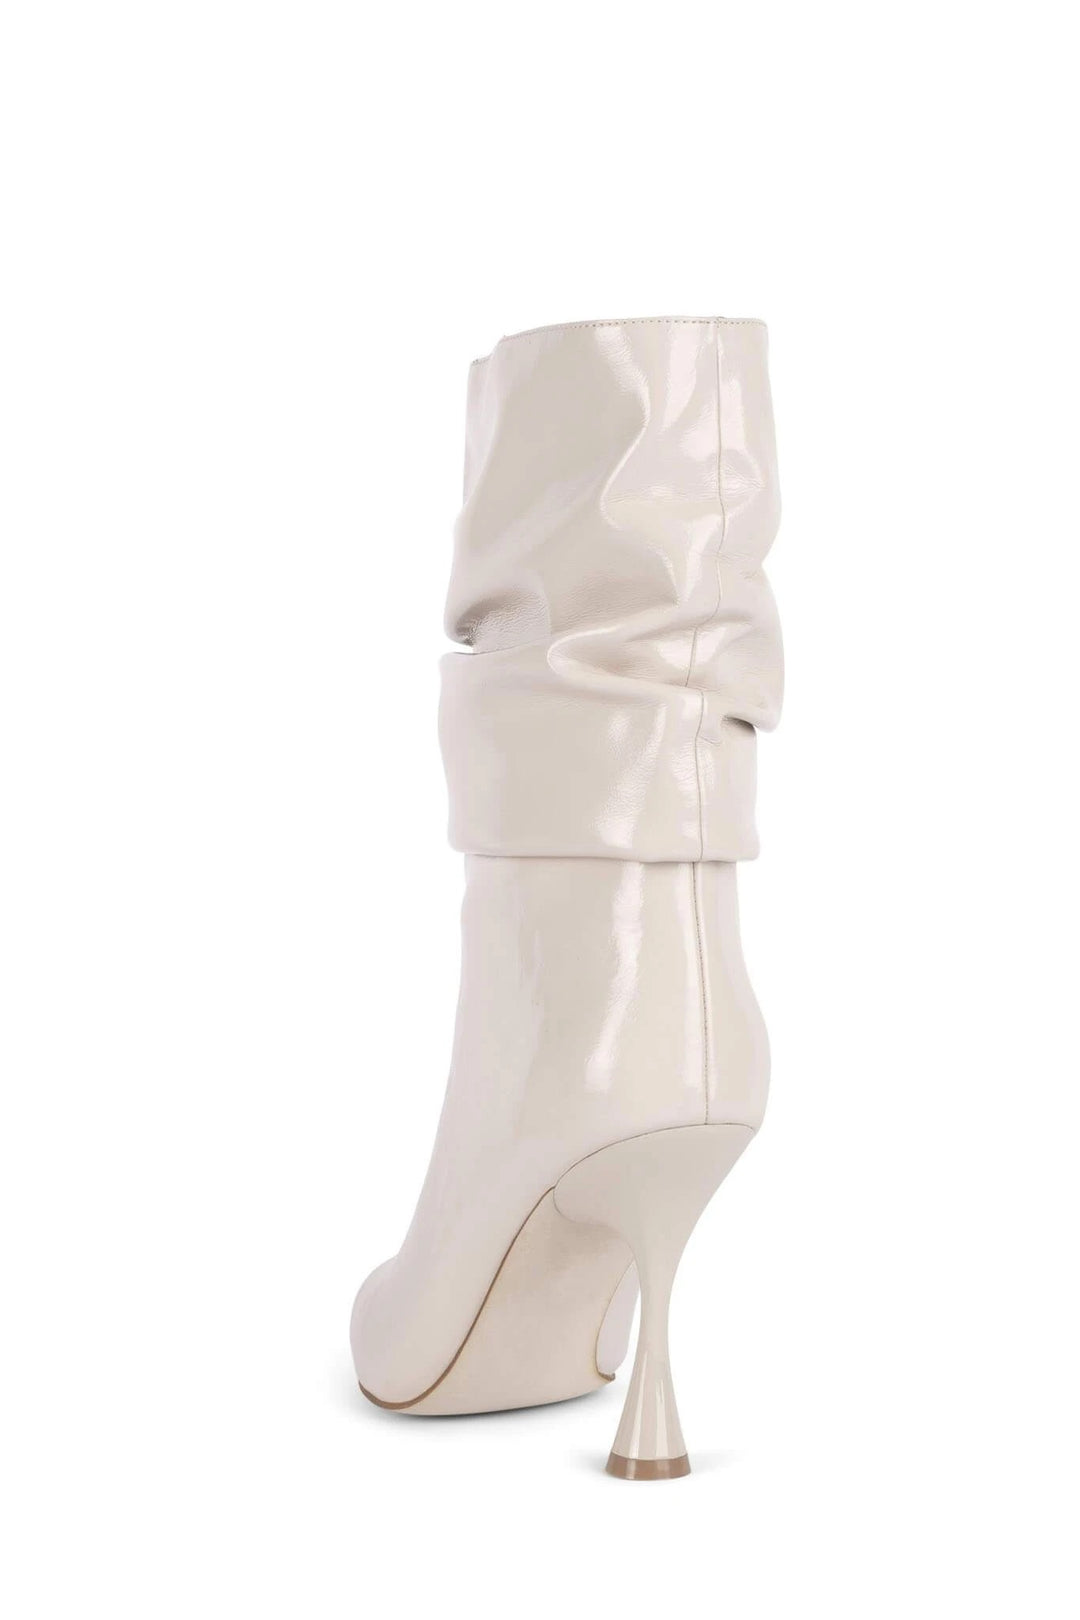 Jeffrey Campbell - Guillaume Slouched Boot in Ivory Patent